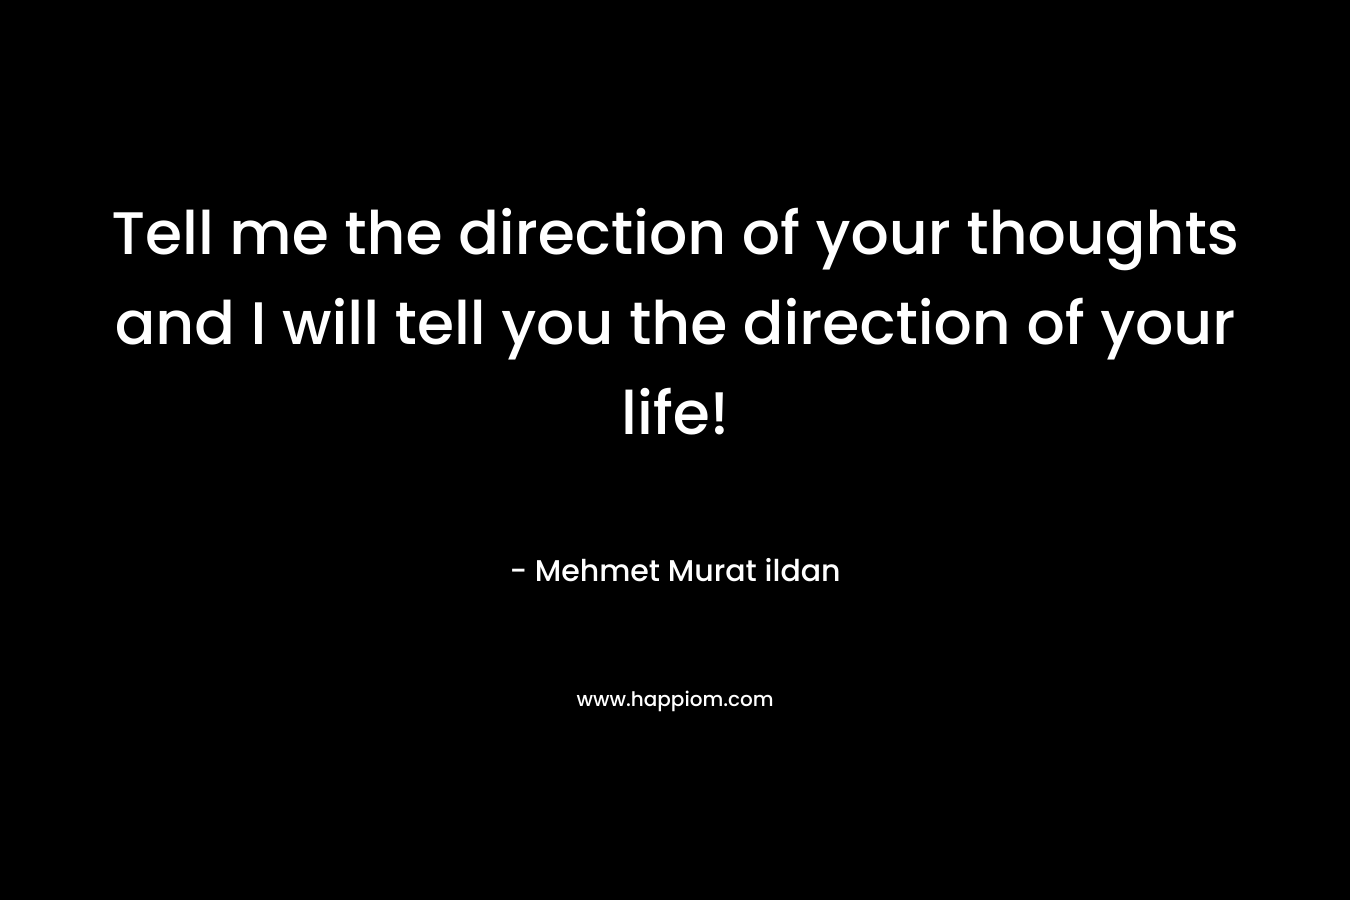 Tell me the direction of your thoughts and I will tell you the direction of your life!